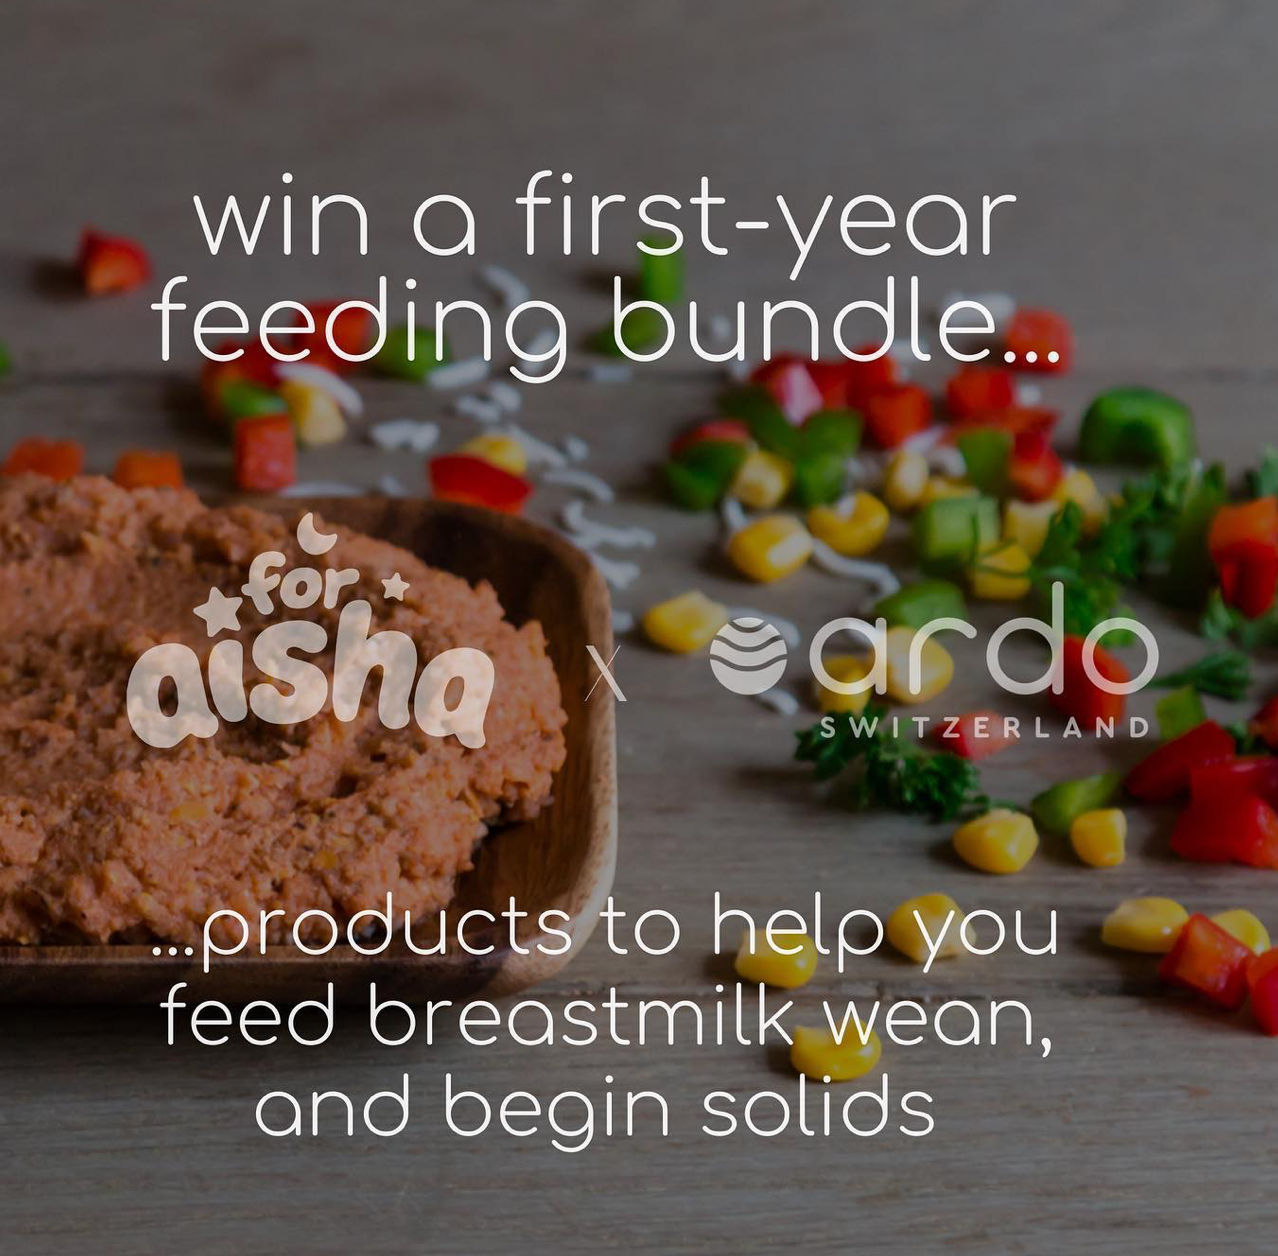 For Aisha partners with Ardo to give away a first-year feeding bundle worth over '300!